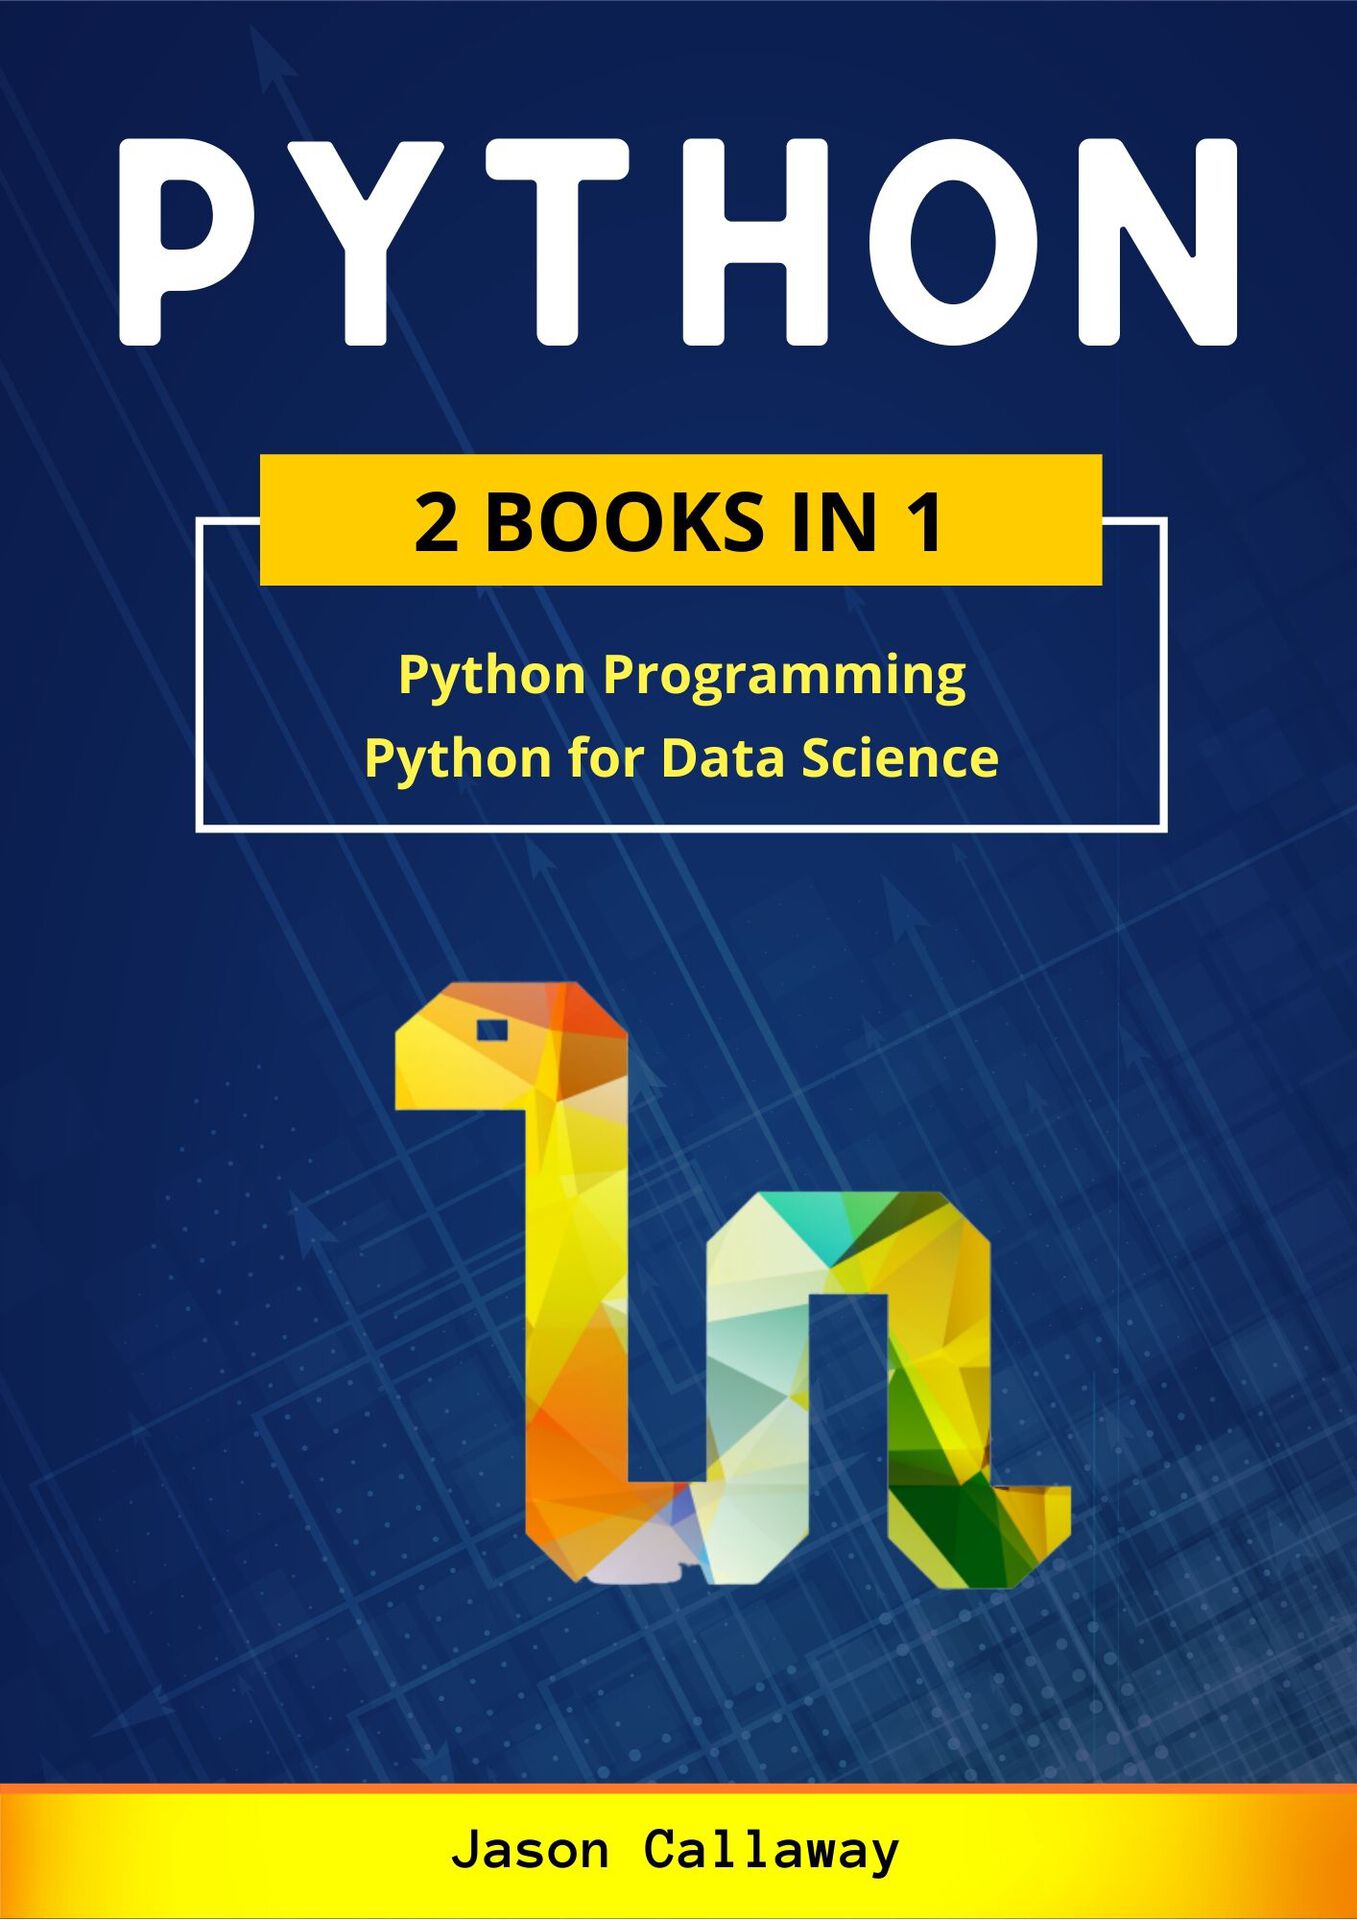 Python: 2 Books in 1: Python Programming & Data Science. Master Data Analysis in Less Than 7 Days and Discover the Secrets of Machine Learning with Step-By-Step Exercises